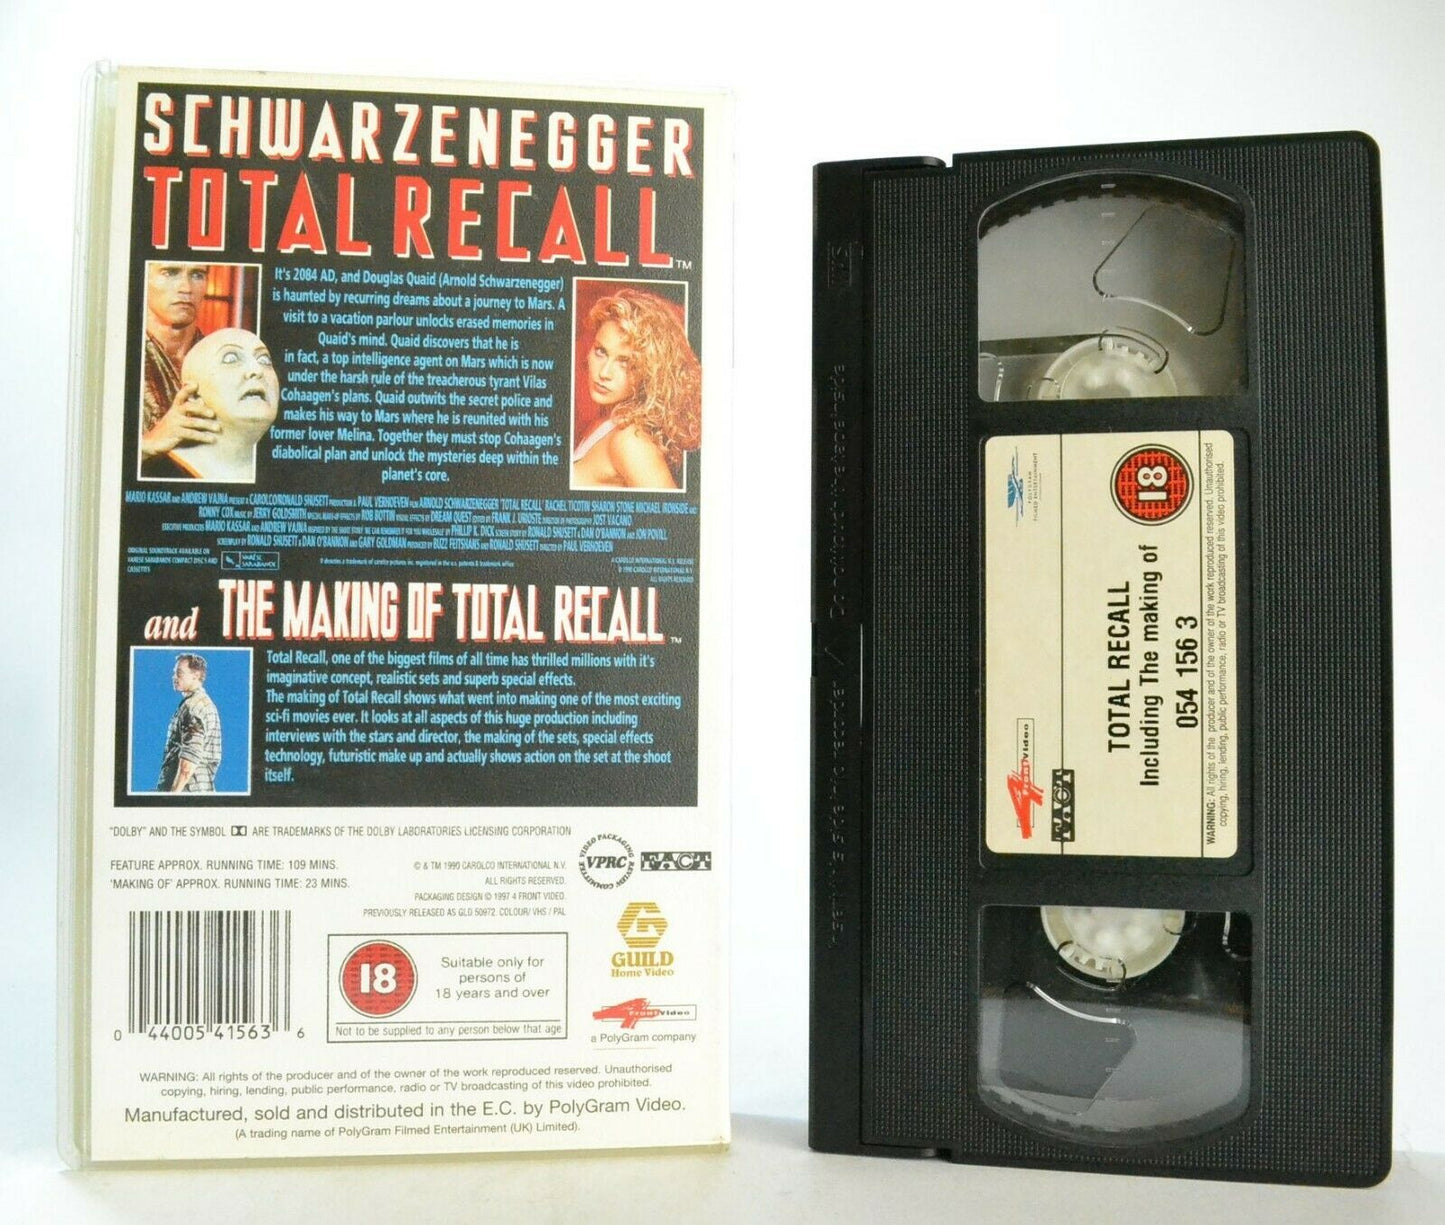 Total Recall (And The Making Of): Dystopian Sci-Fi - A.Schwarzenegger - Pal VHS-